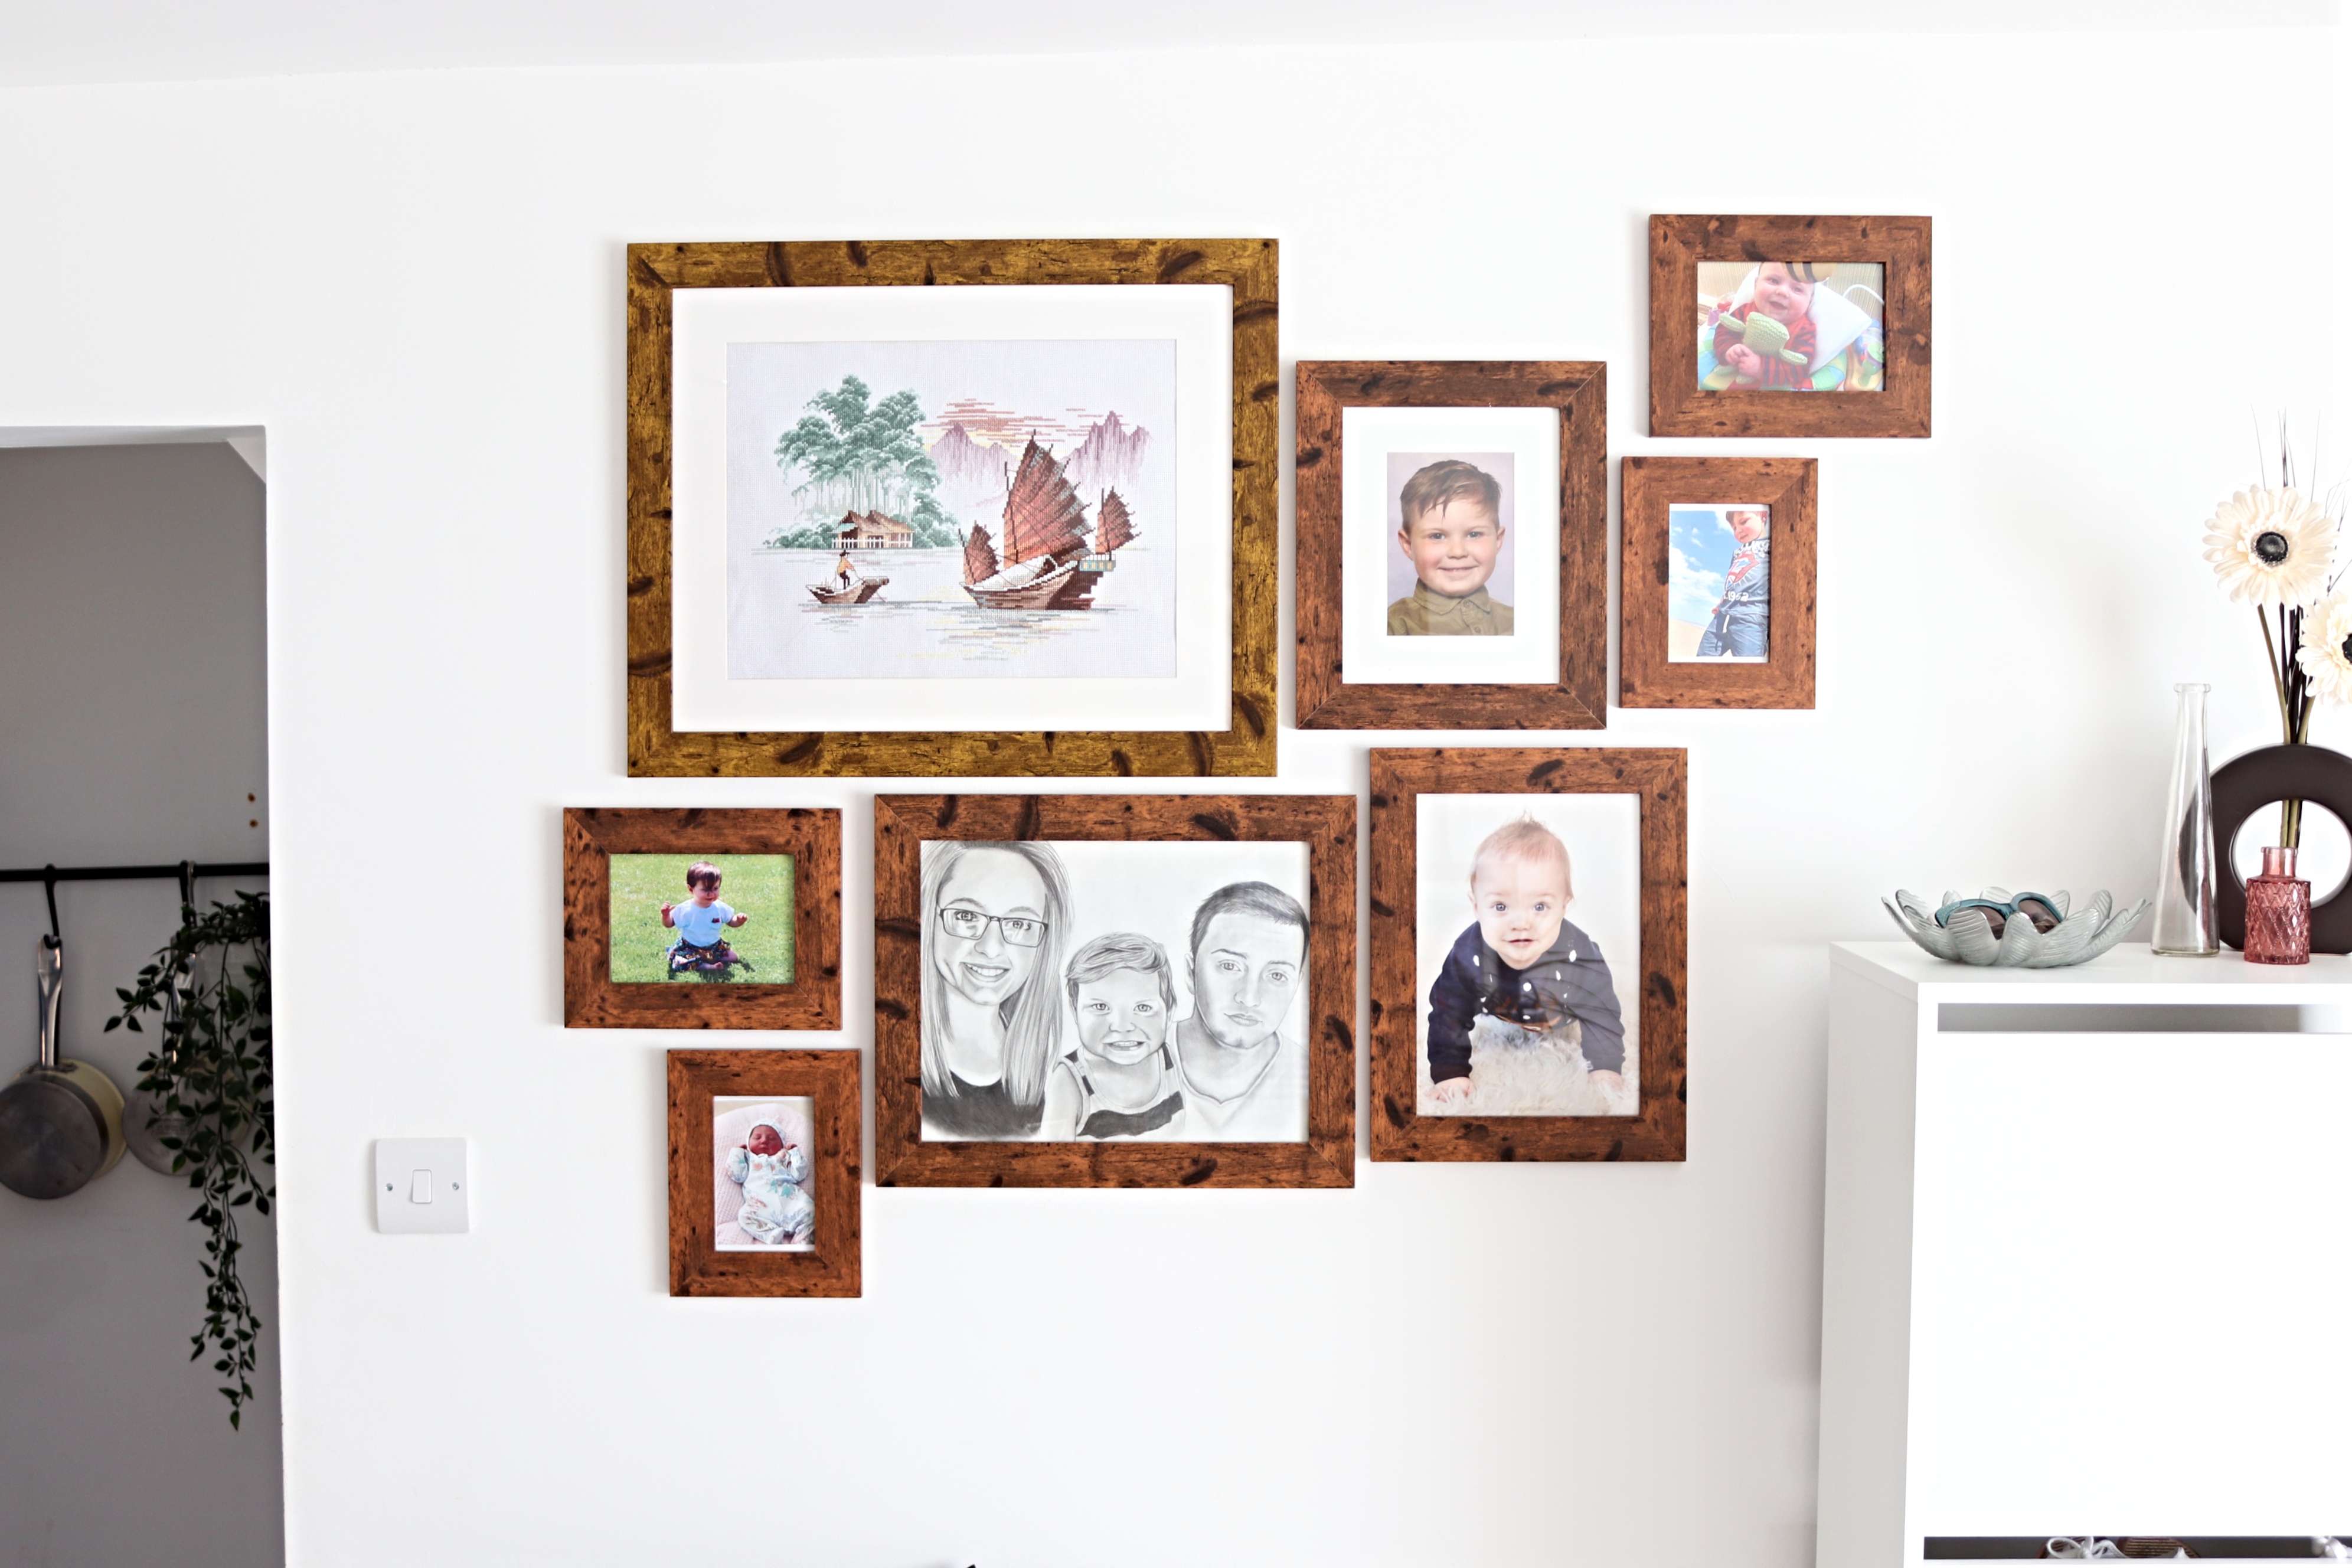 how to plan and hang a gallery wall